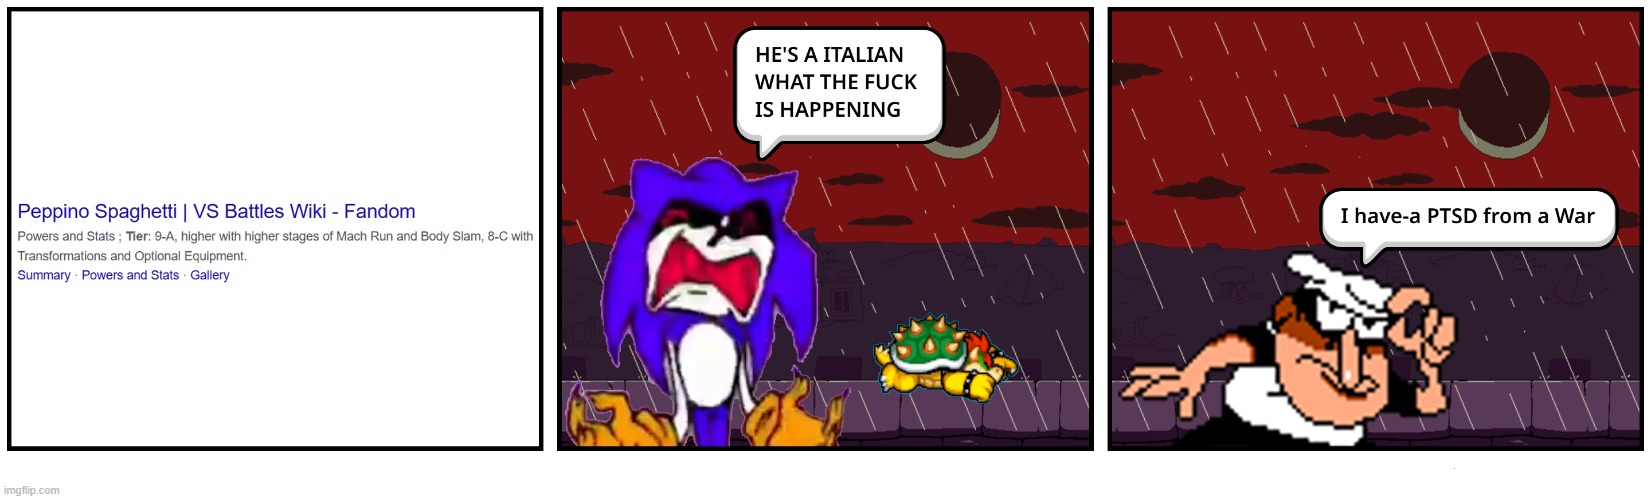 Peppino the Powerful (Pizza Comics) | image tagged in funny,memes,pizza tower,comics,needlemouse,death battle | made w/ Imgflip meme maker